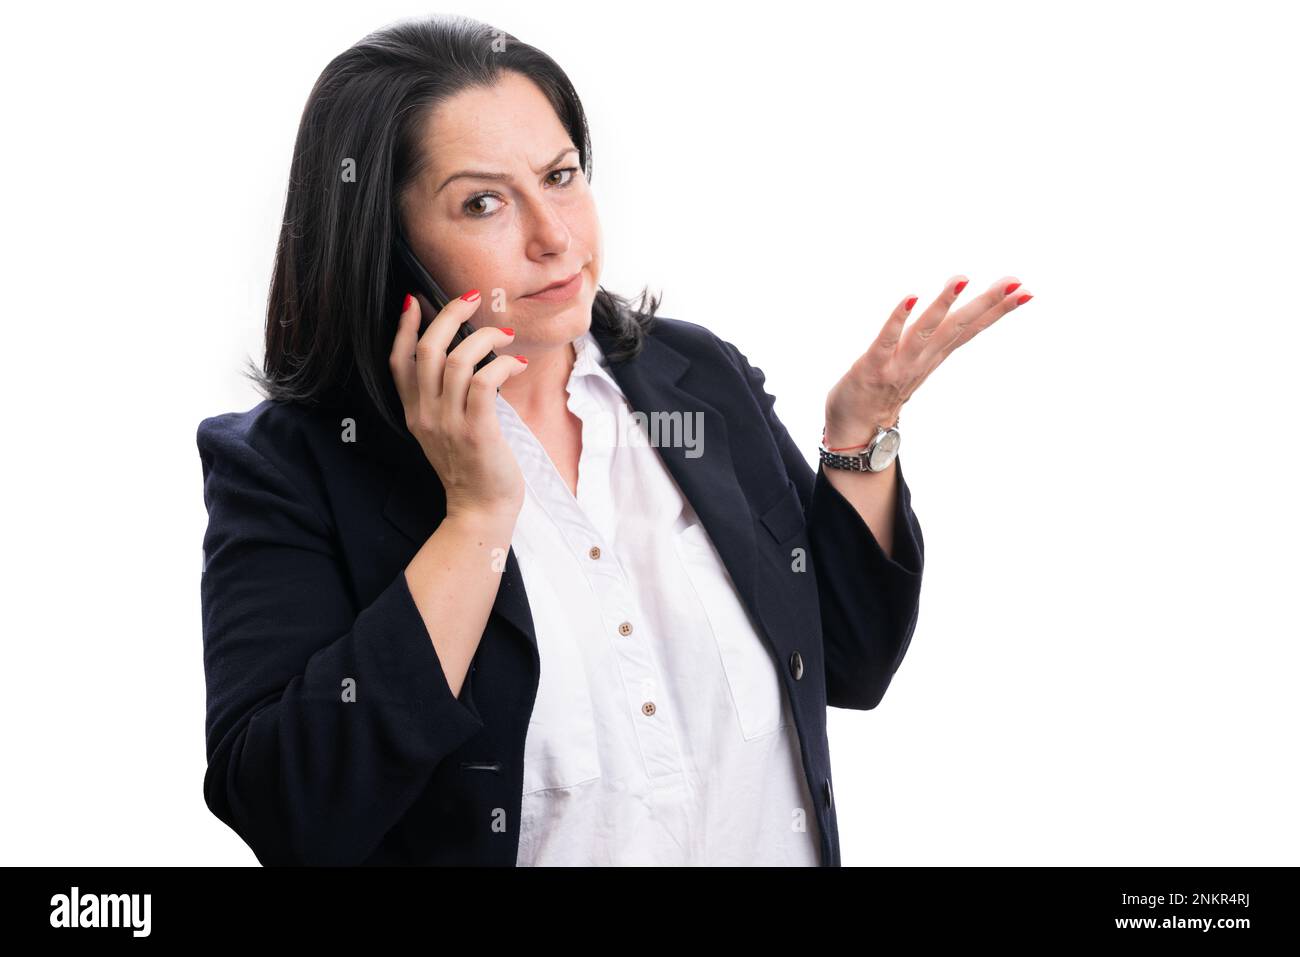 Adult businesswoman making phonecall with confused expression and gesture as office corporate concept isolated on white studio background Stock Photo